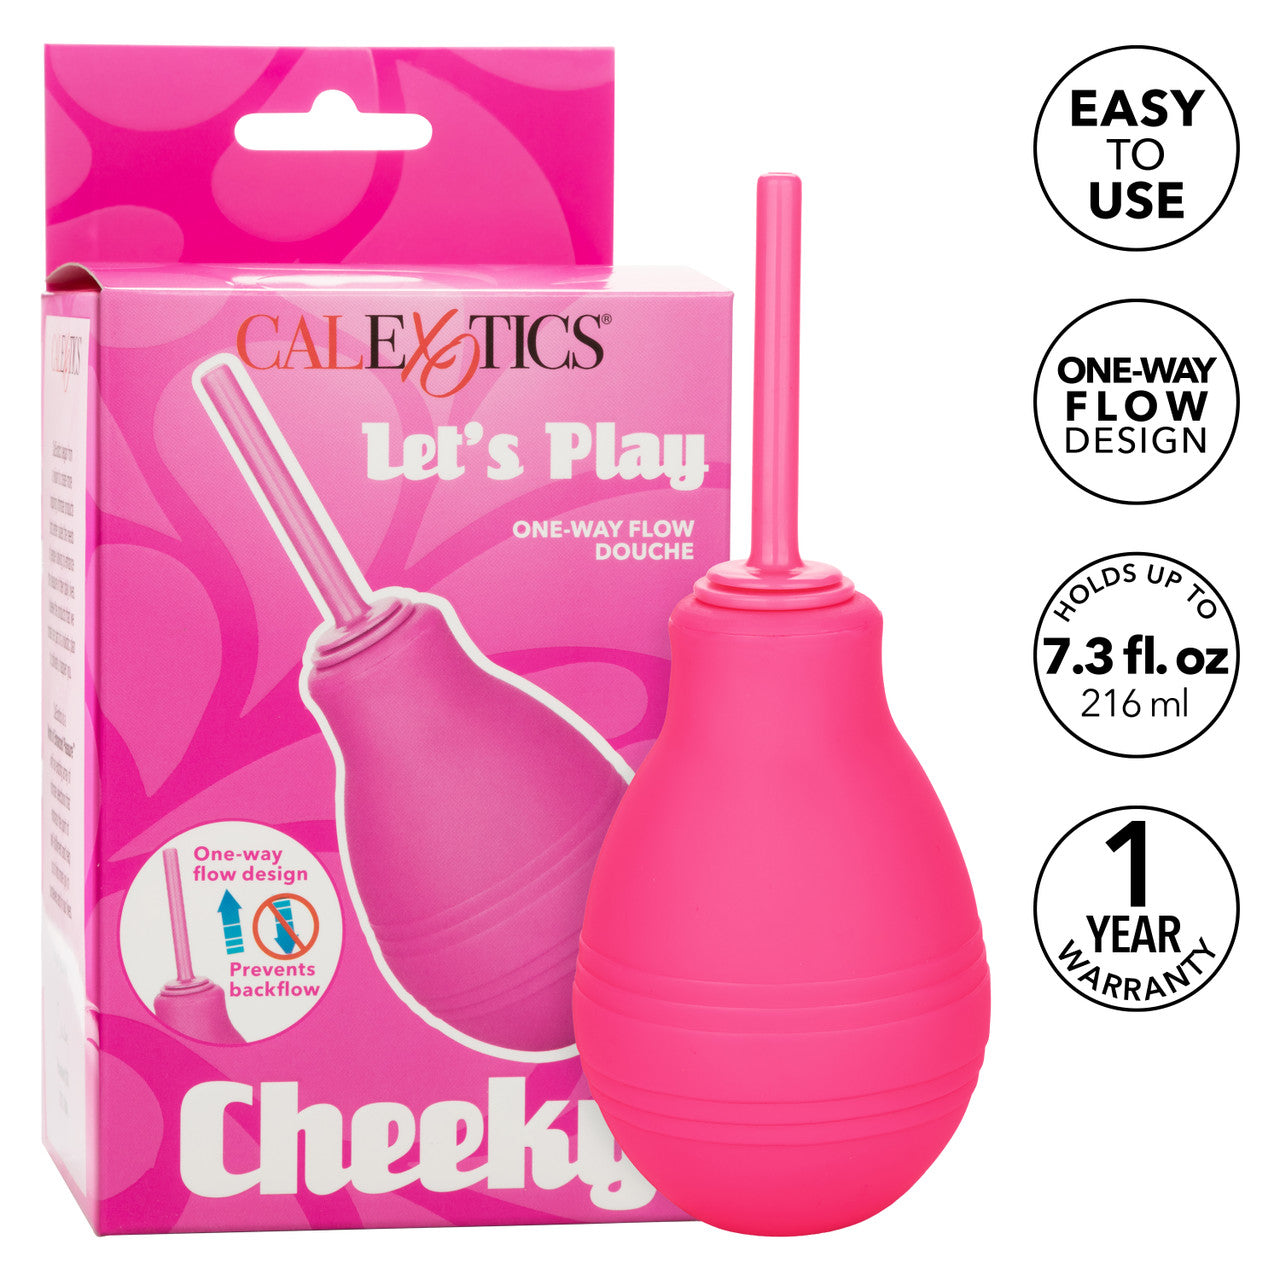 Cheeky™ One-Way Flow Douche - Pink